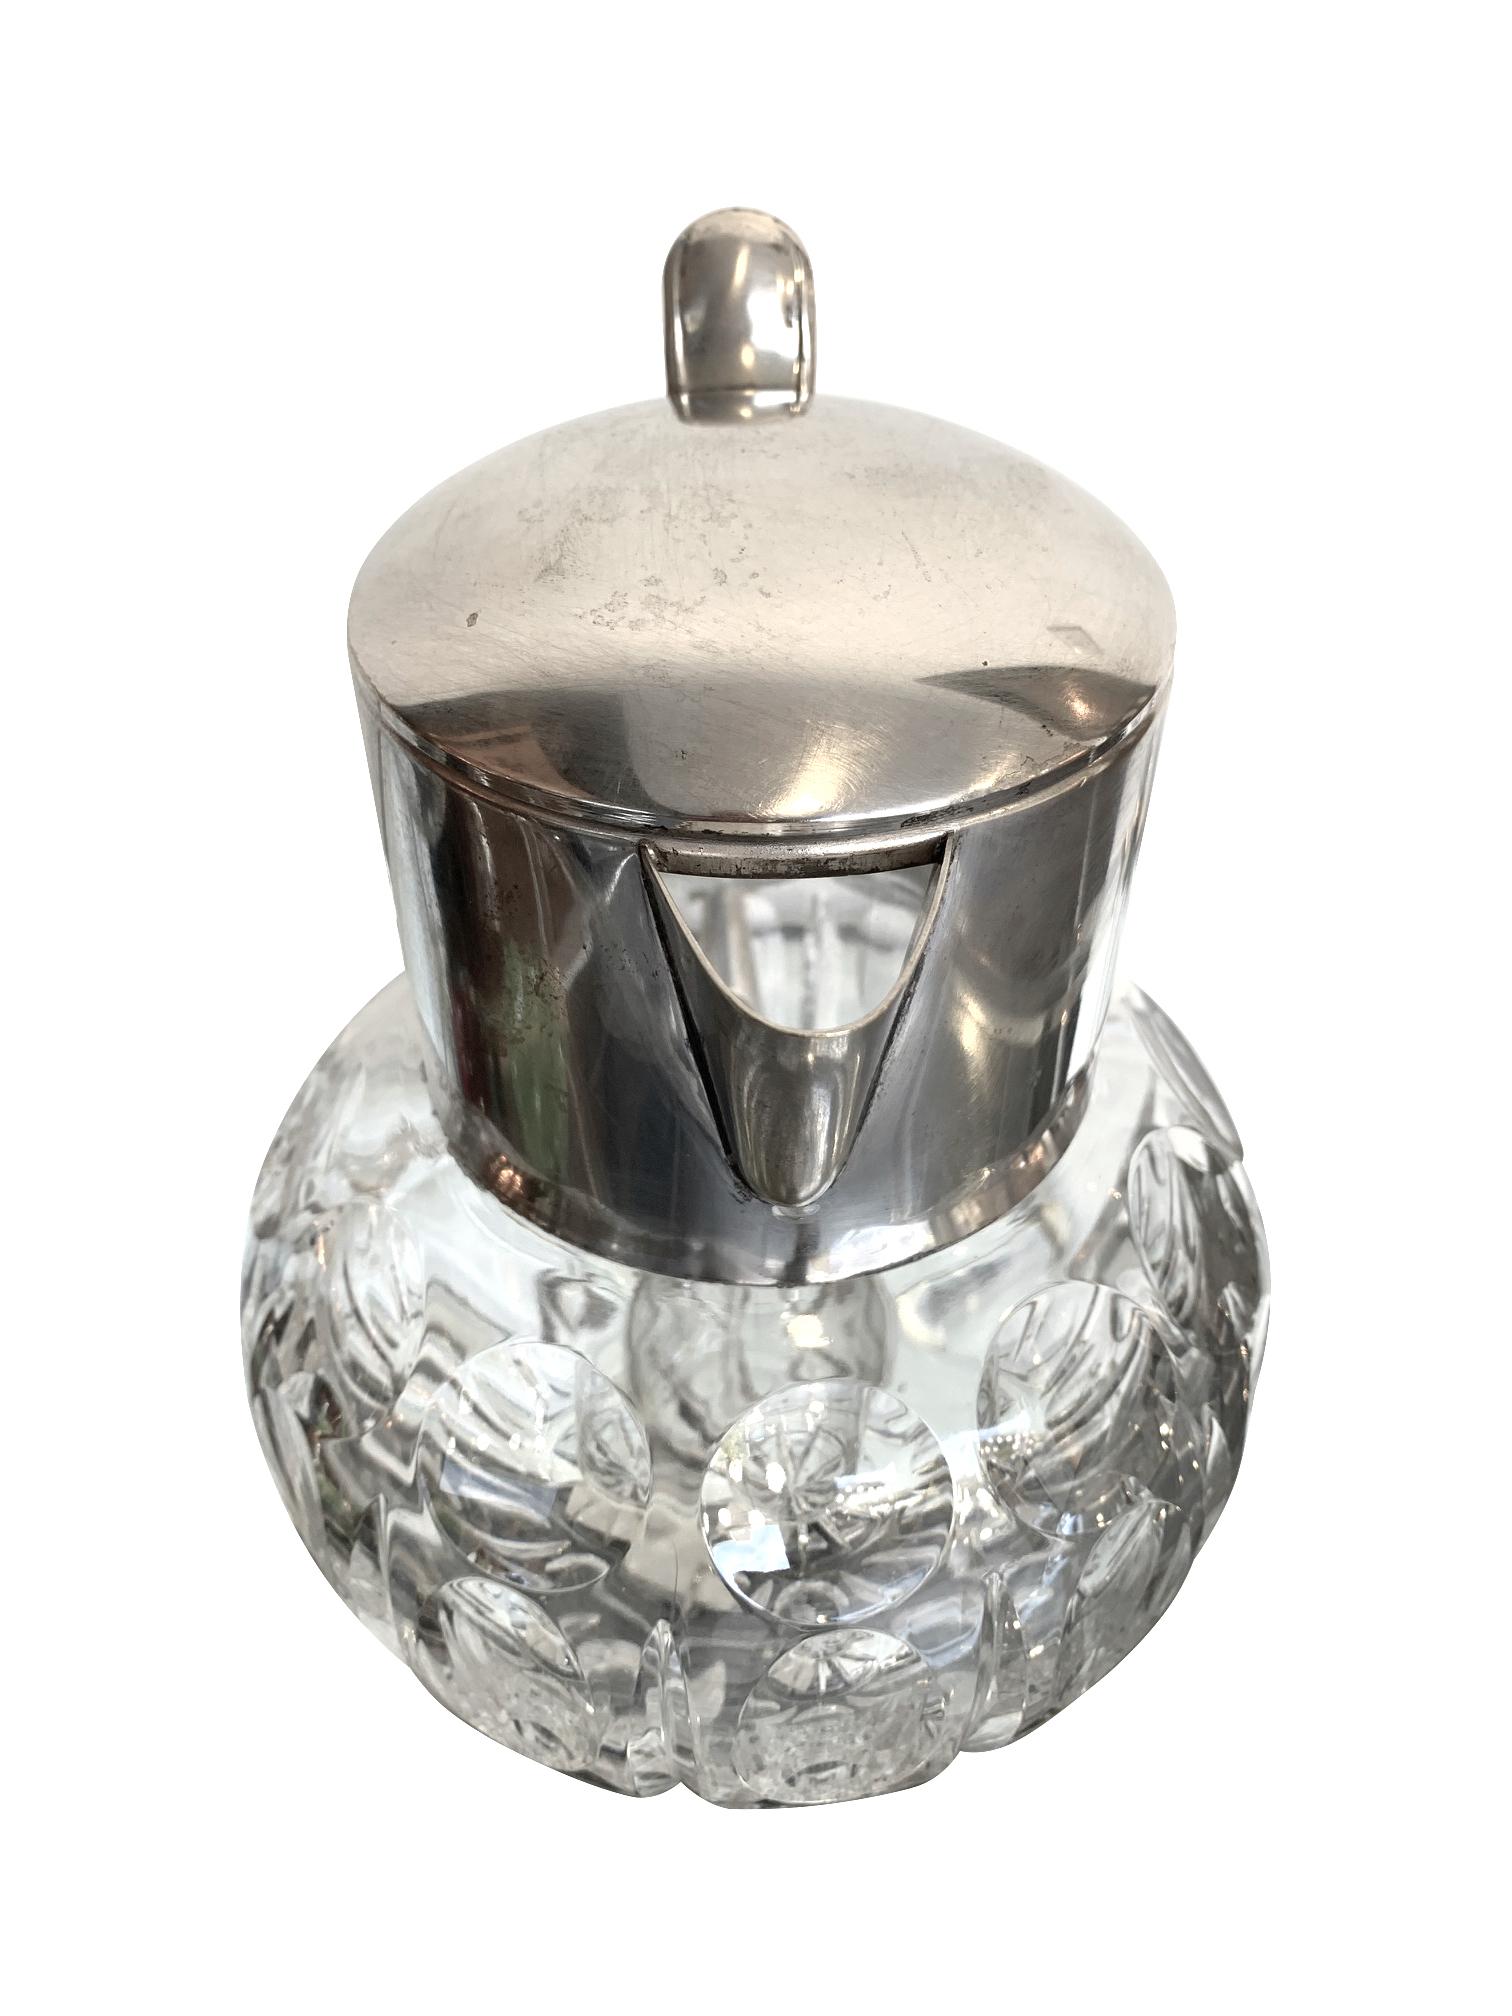 Wmf Silver Plated Crystal Lemonade / Cocktail Jug Engraved with Circle Motifs For Sale 2